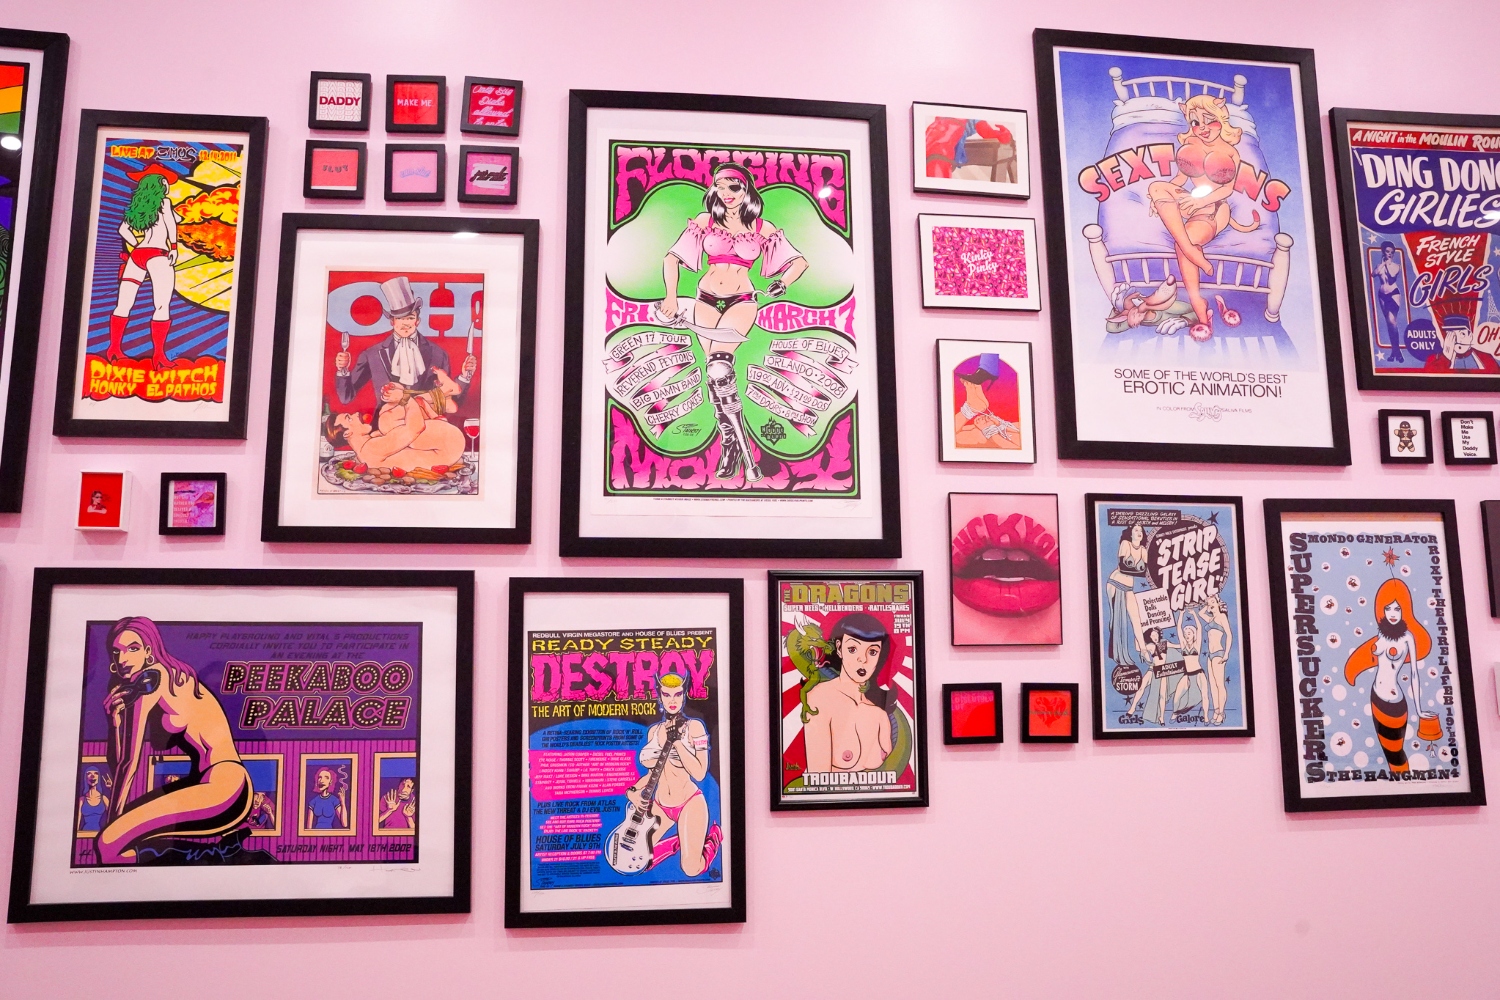 A gallery of vintage erotic posters lines a pink wall at Kinky's Dessert Bar